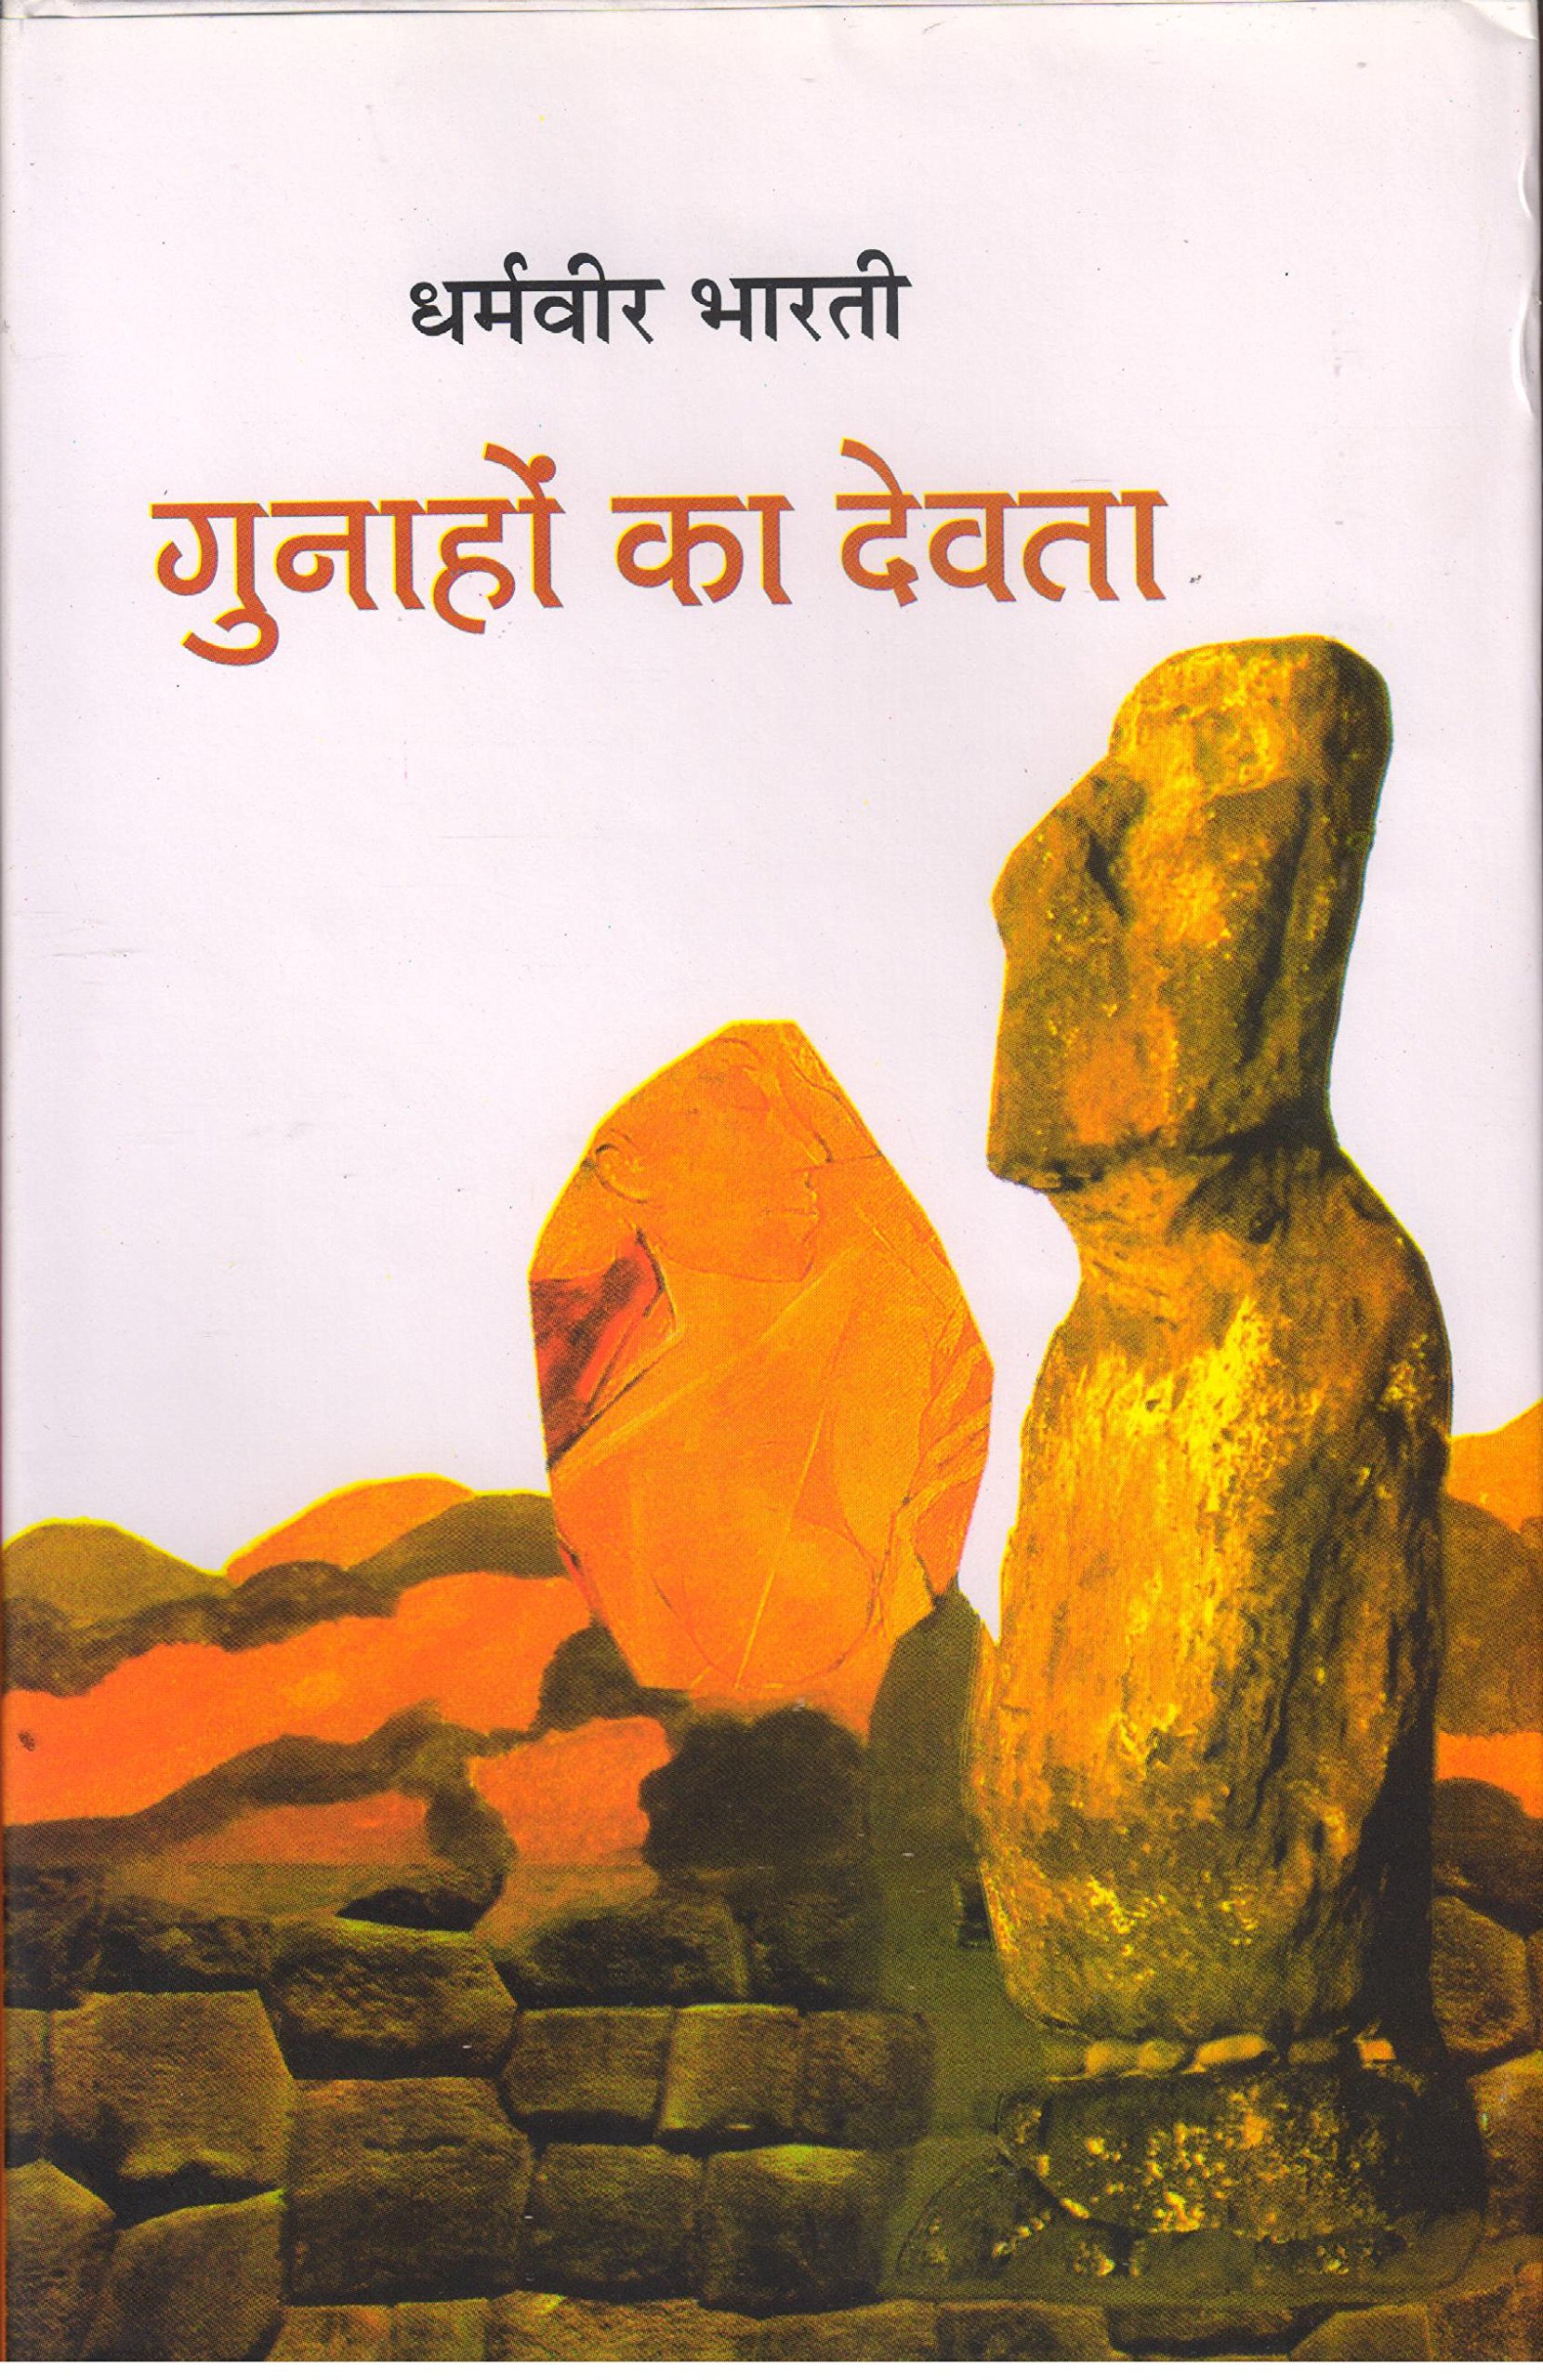 Frontlist Top 15 best Hindi novels by renowned Indian authors one